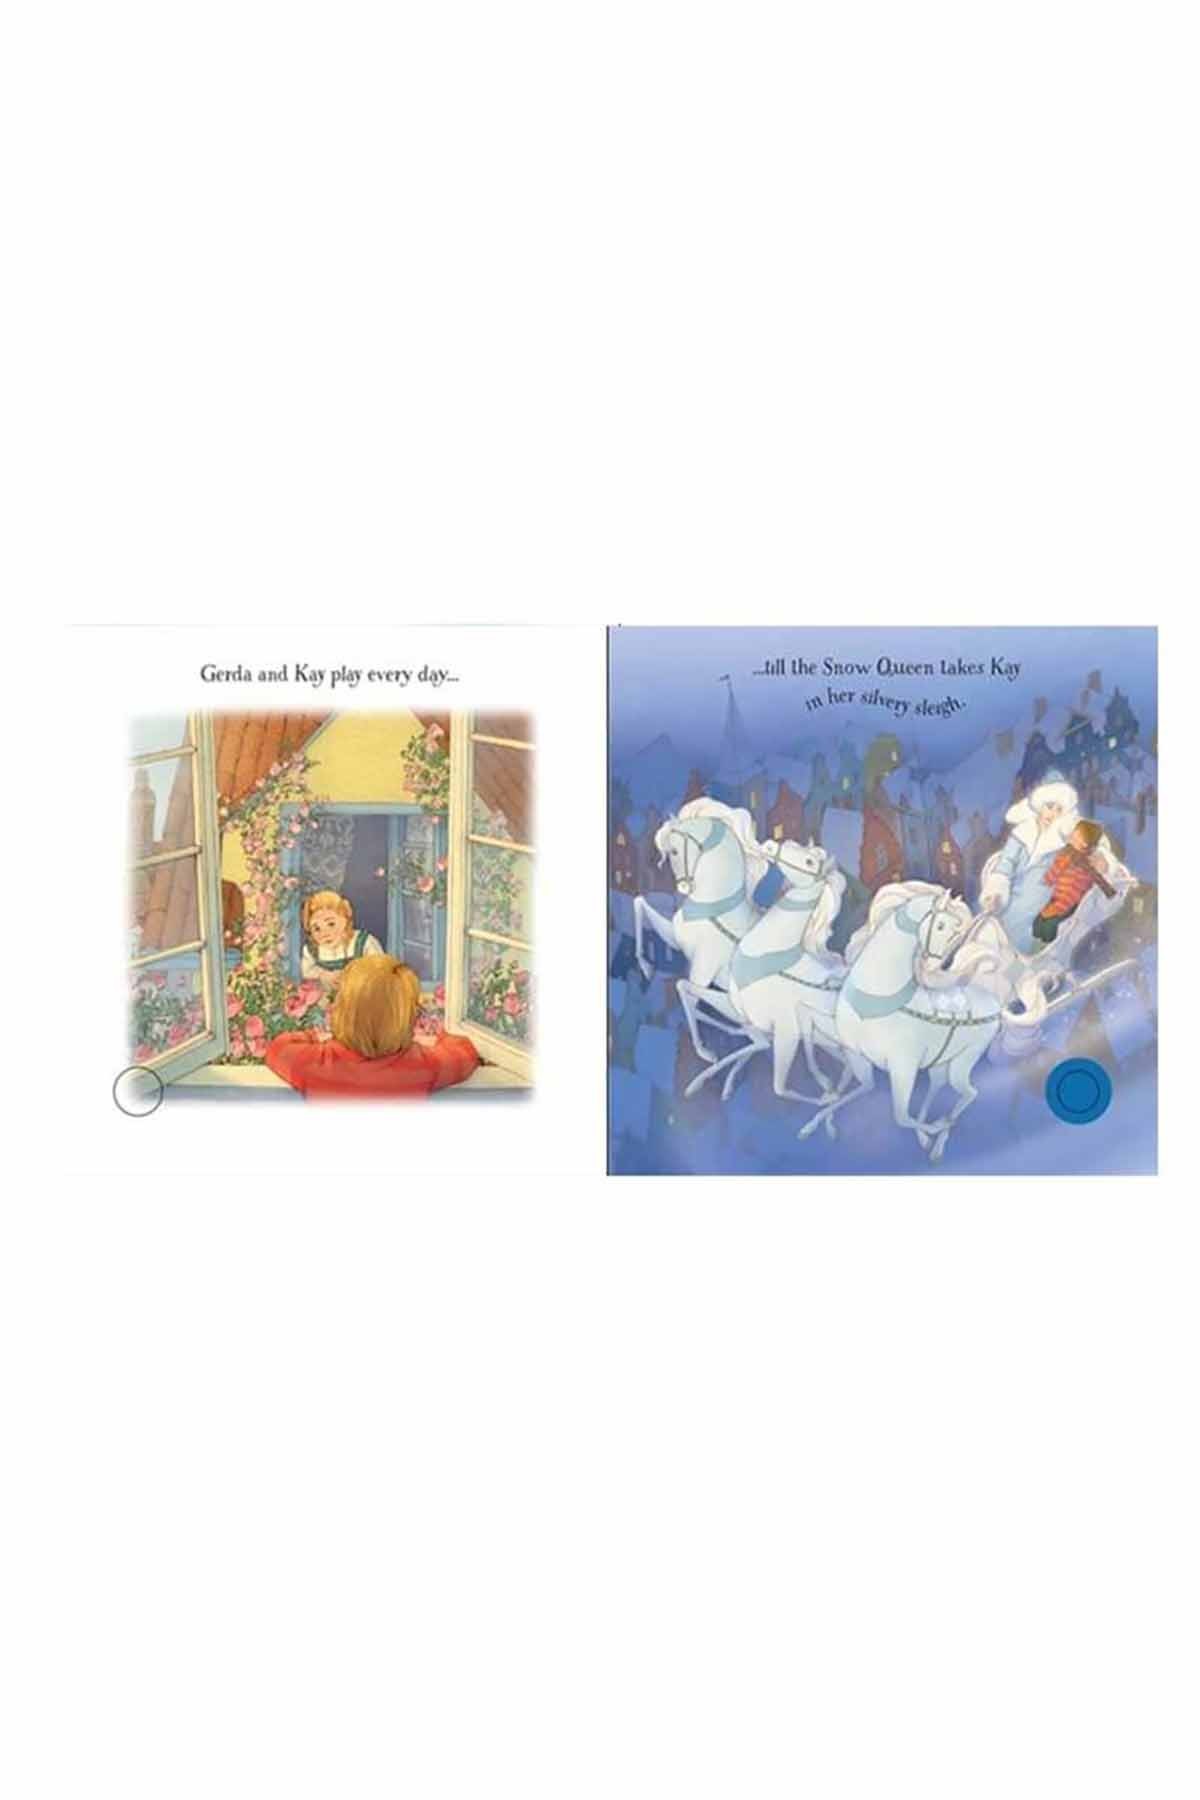 The Usborne The Snow Queen - Listen and Learn Stories